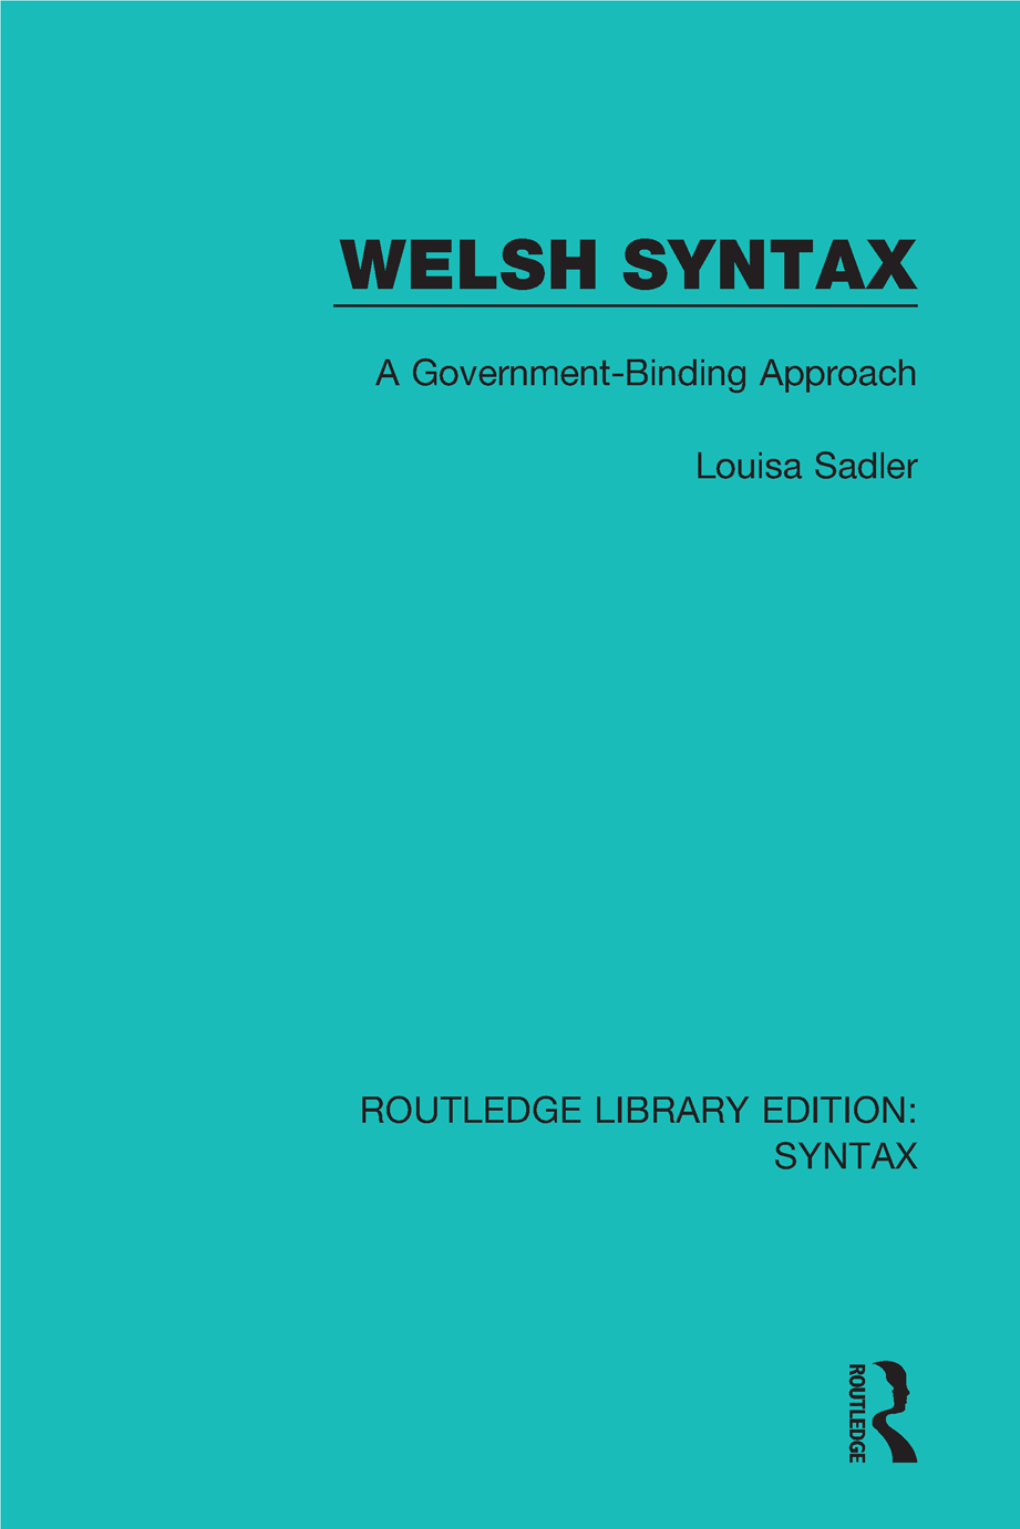 WELSH SYNTAX Pagethis Intentionally Left Blank WELSH SYNTAX a Government-Binding Approach